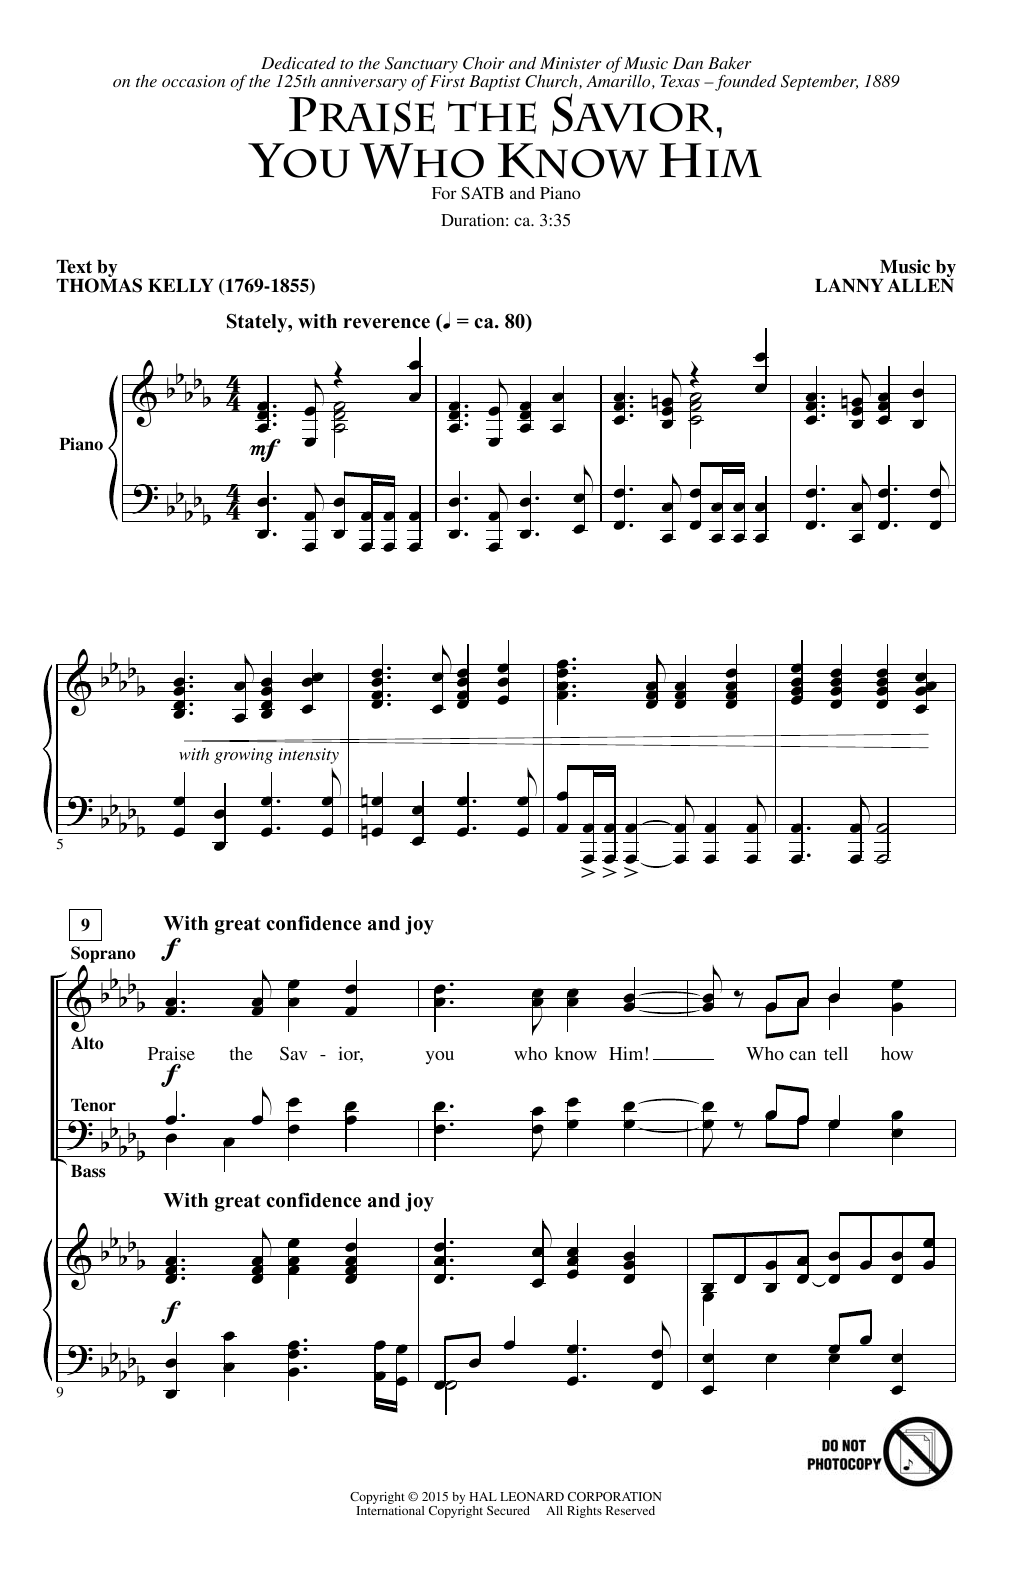 Download Lanny Allen Praise The Savior, You Who Know Him Sheet Music